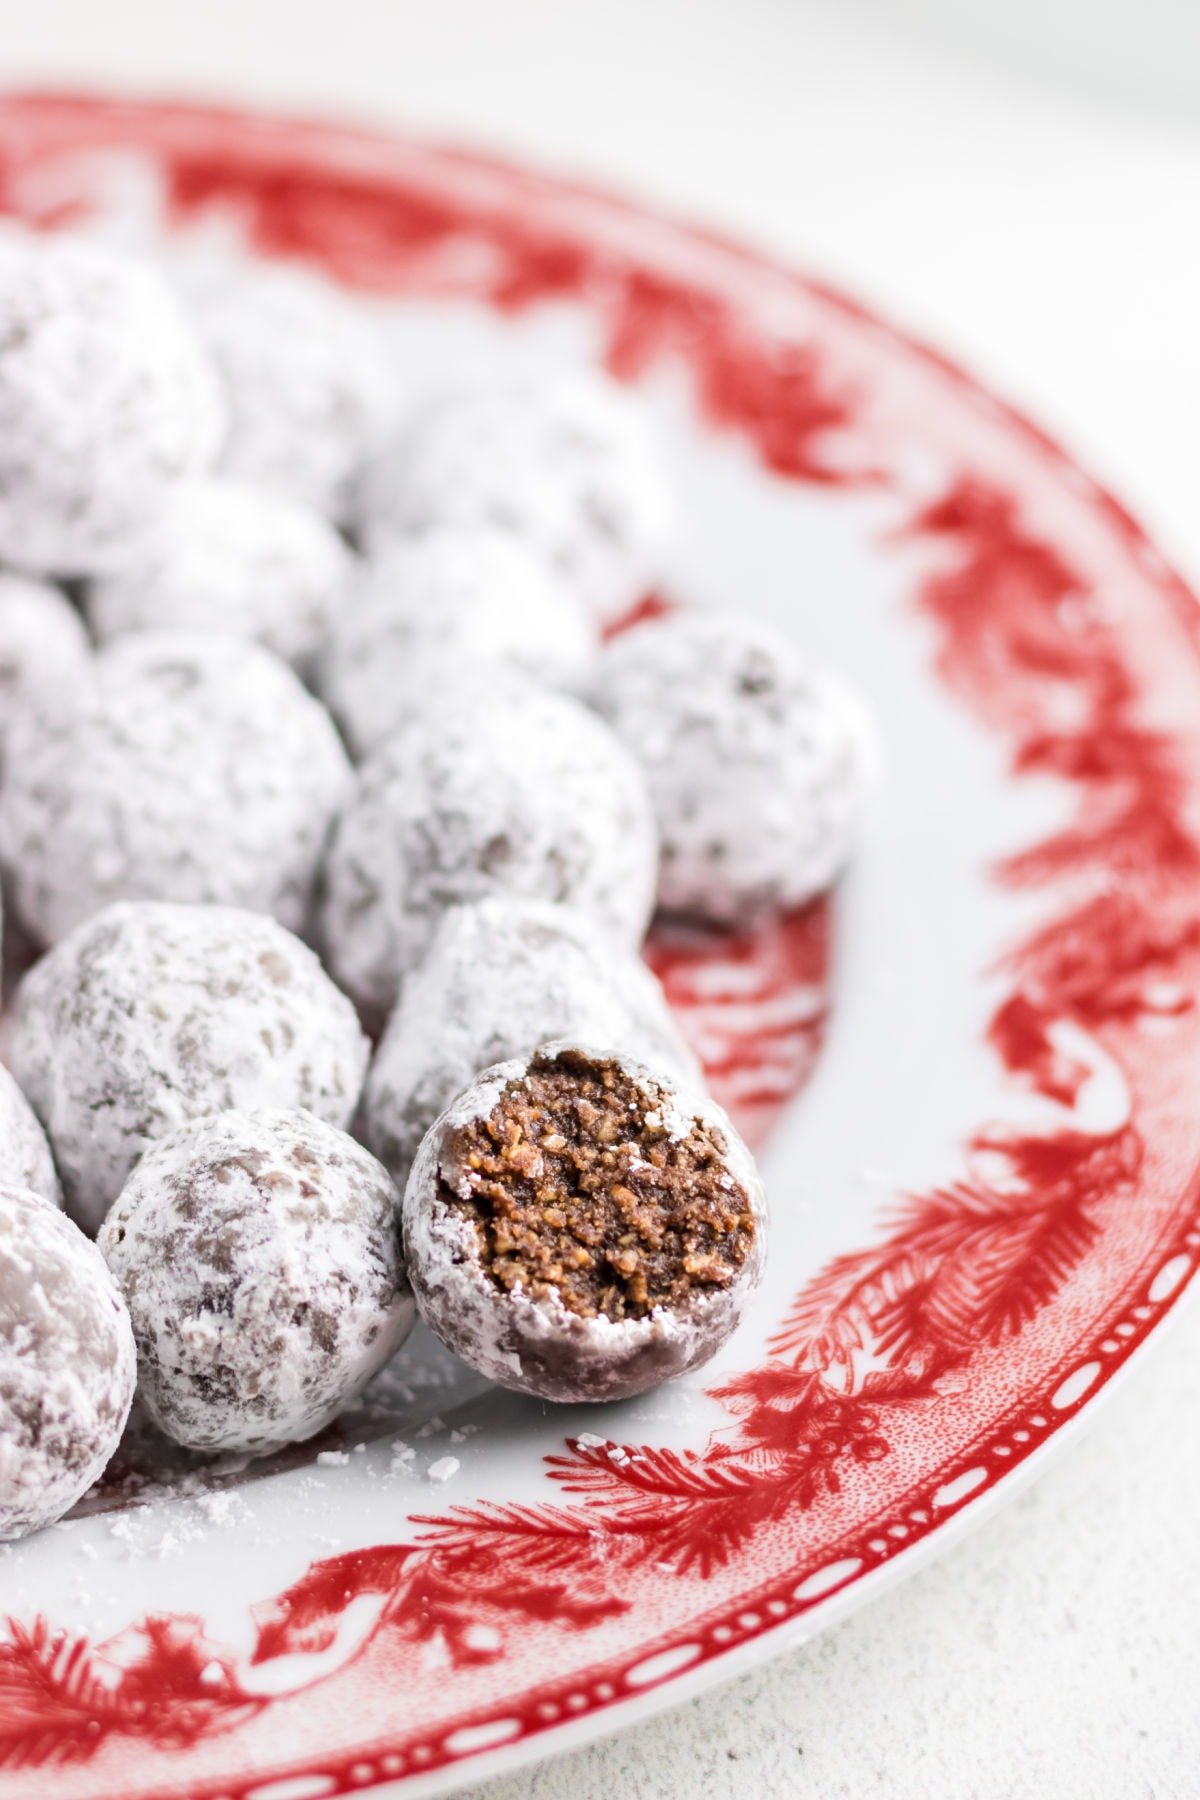 Closeup of bourbon balls covered in white powdered sugar on a red plate.